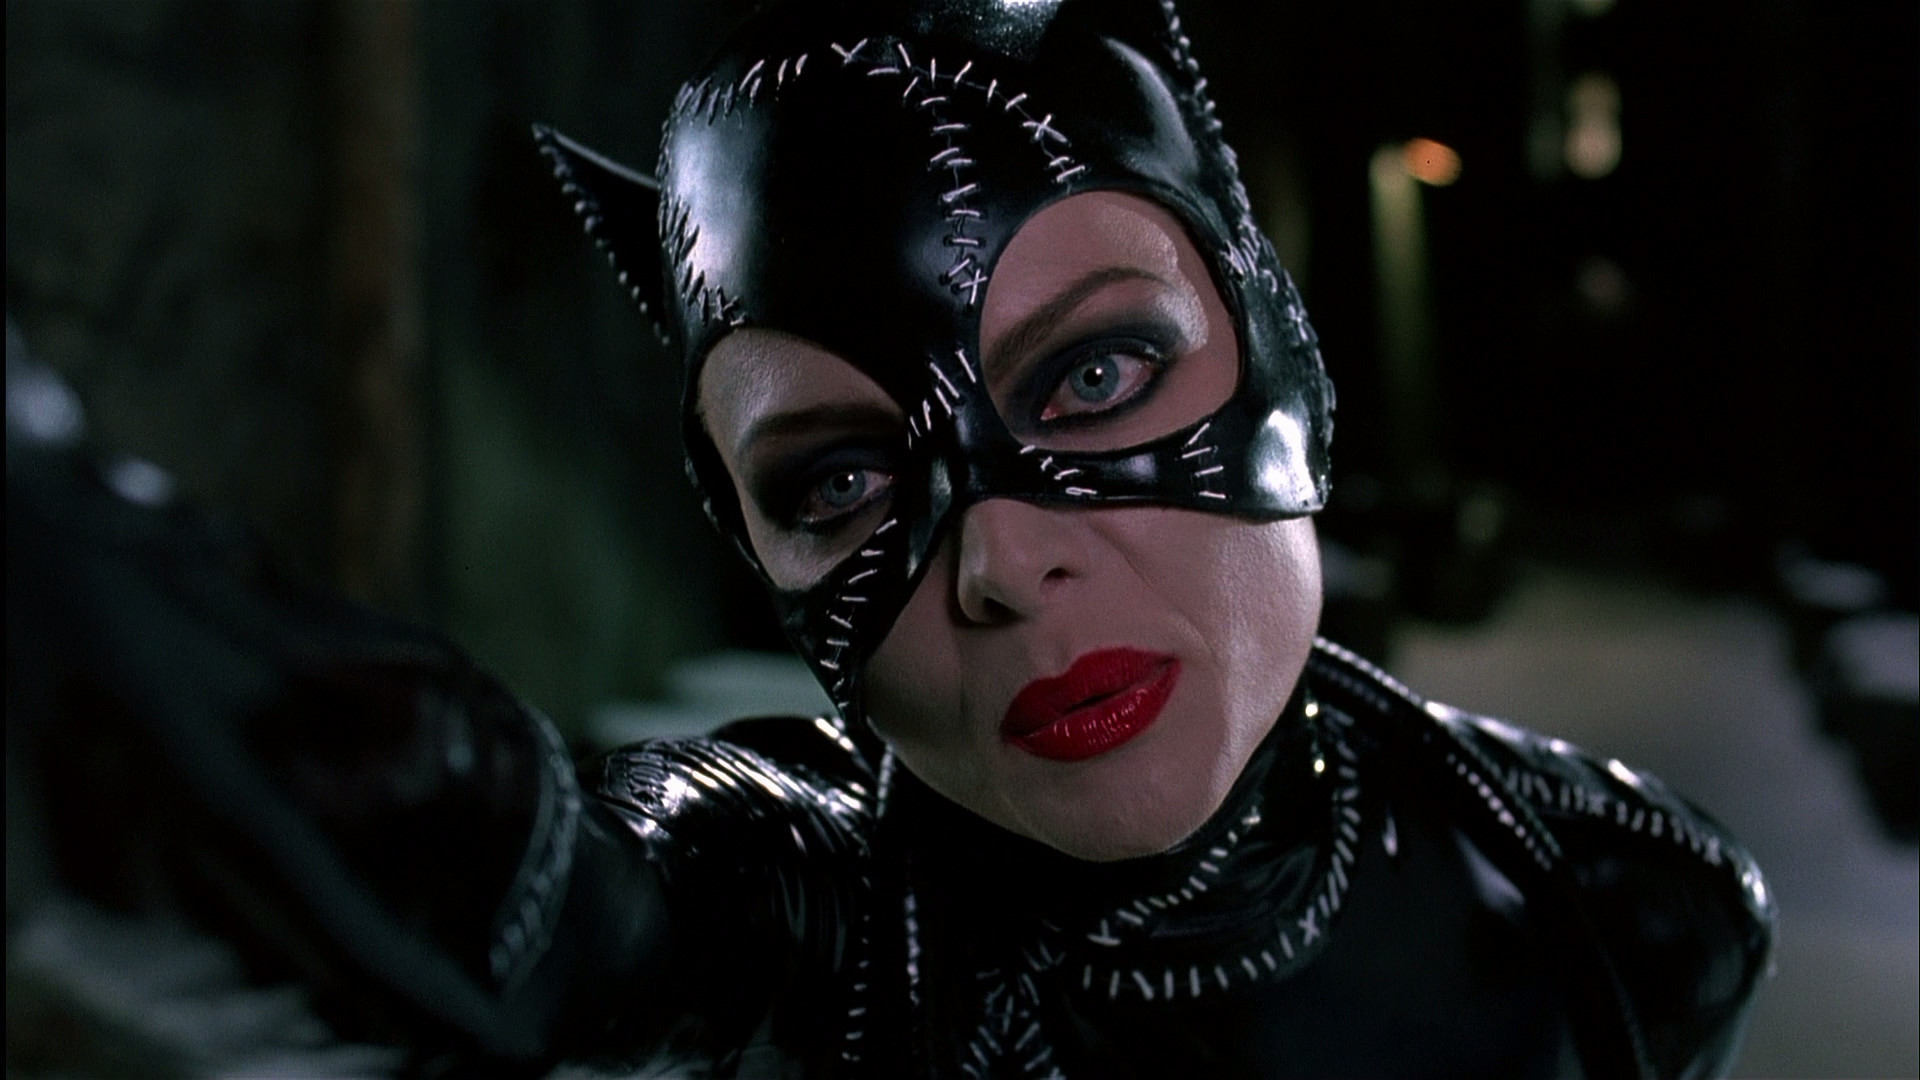 The Cast Of 'Batman Returns': Where Are They Now? - Dark Knight News